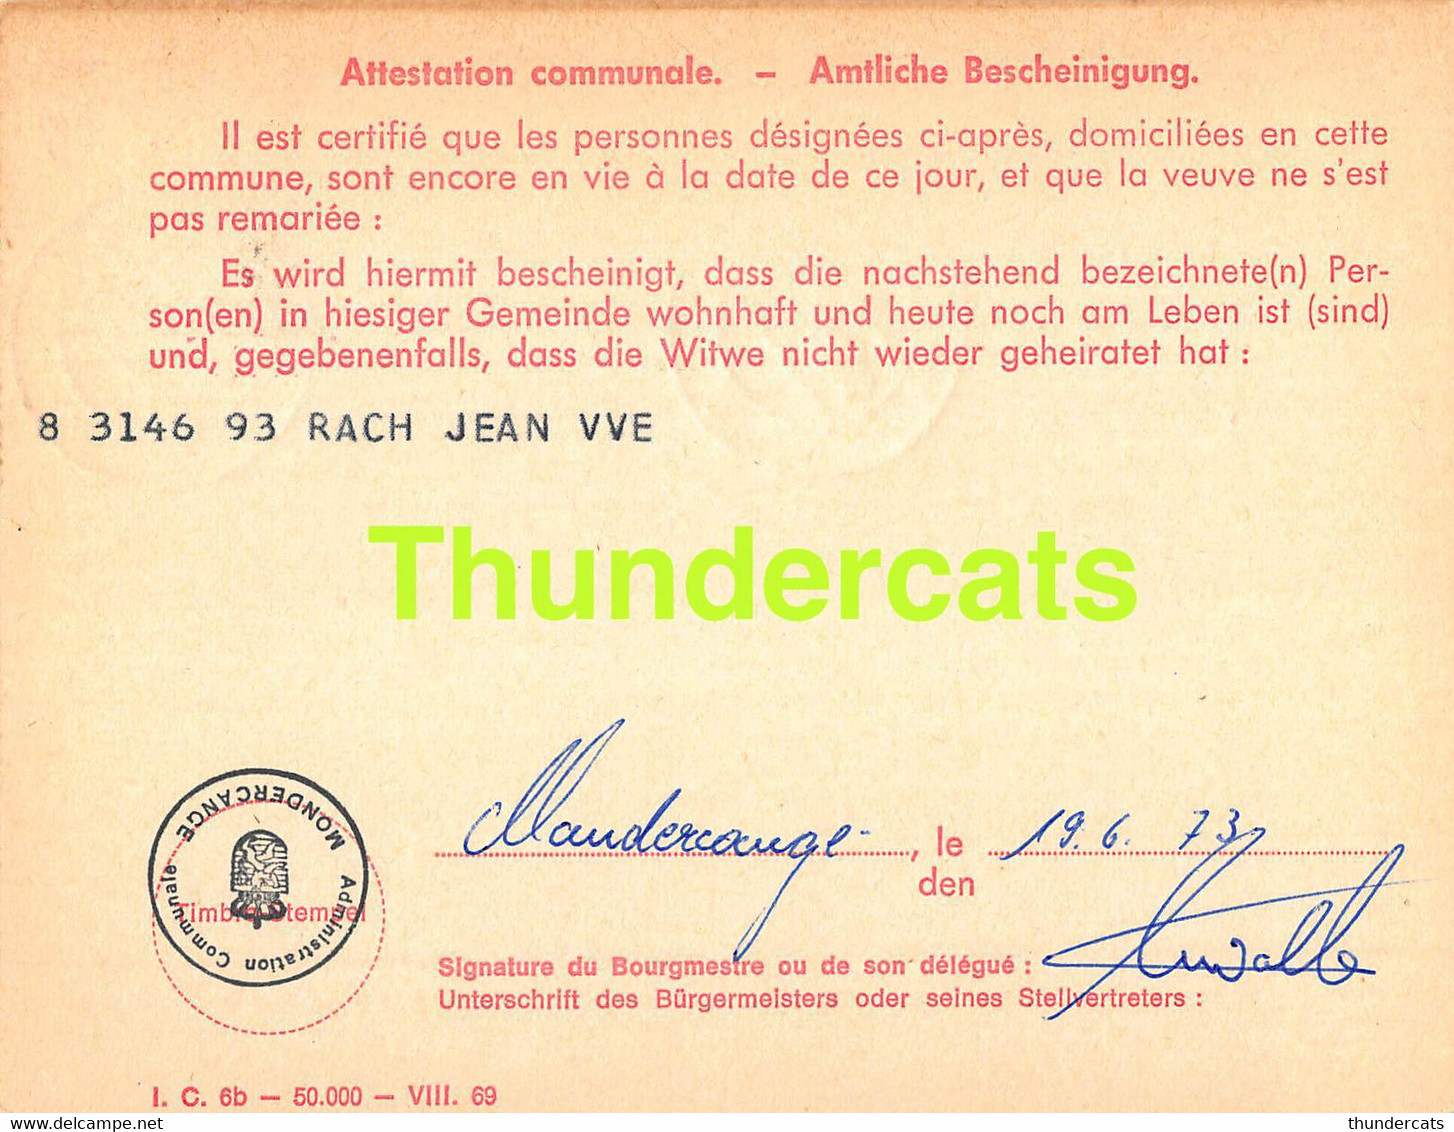 ASSURANCE VIEILLESSE INVALIDITE LUXEMBOURG 1973 MONDERCANGE RACH - Covers & Documents